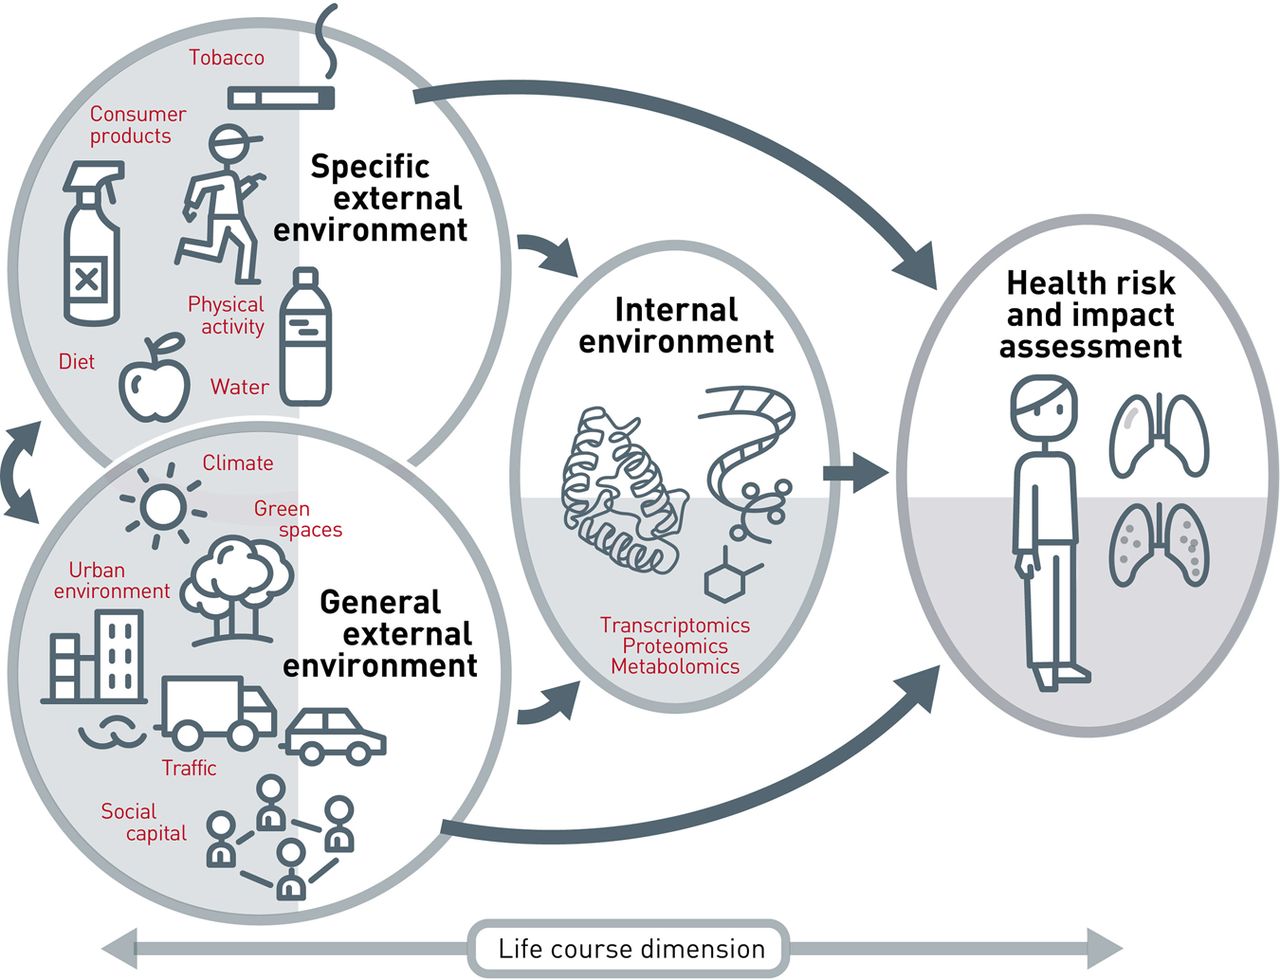 Image schematically showing the interrelation between elements of what makes up the exposome. On the left depicted a lot of factors such as smoking, climate, diet; in the middle the internal environment of the person and to the right the health impact assessment of all this.